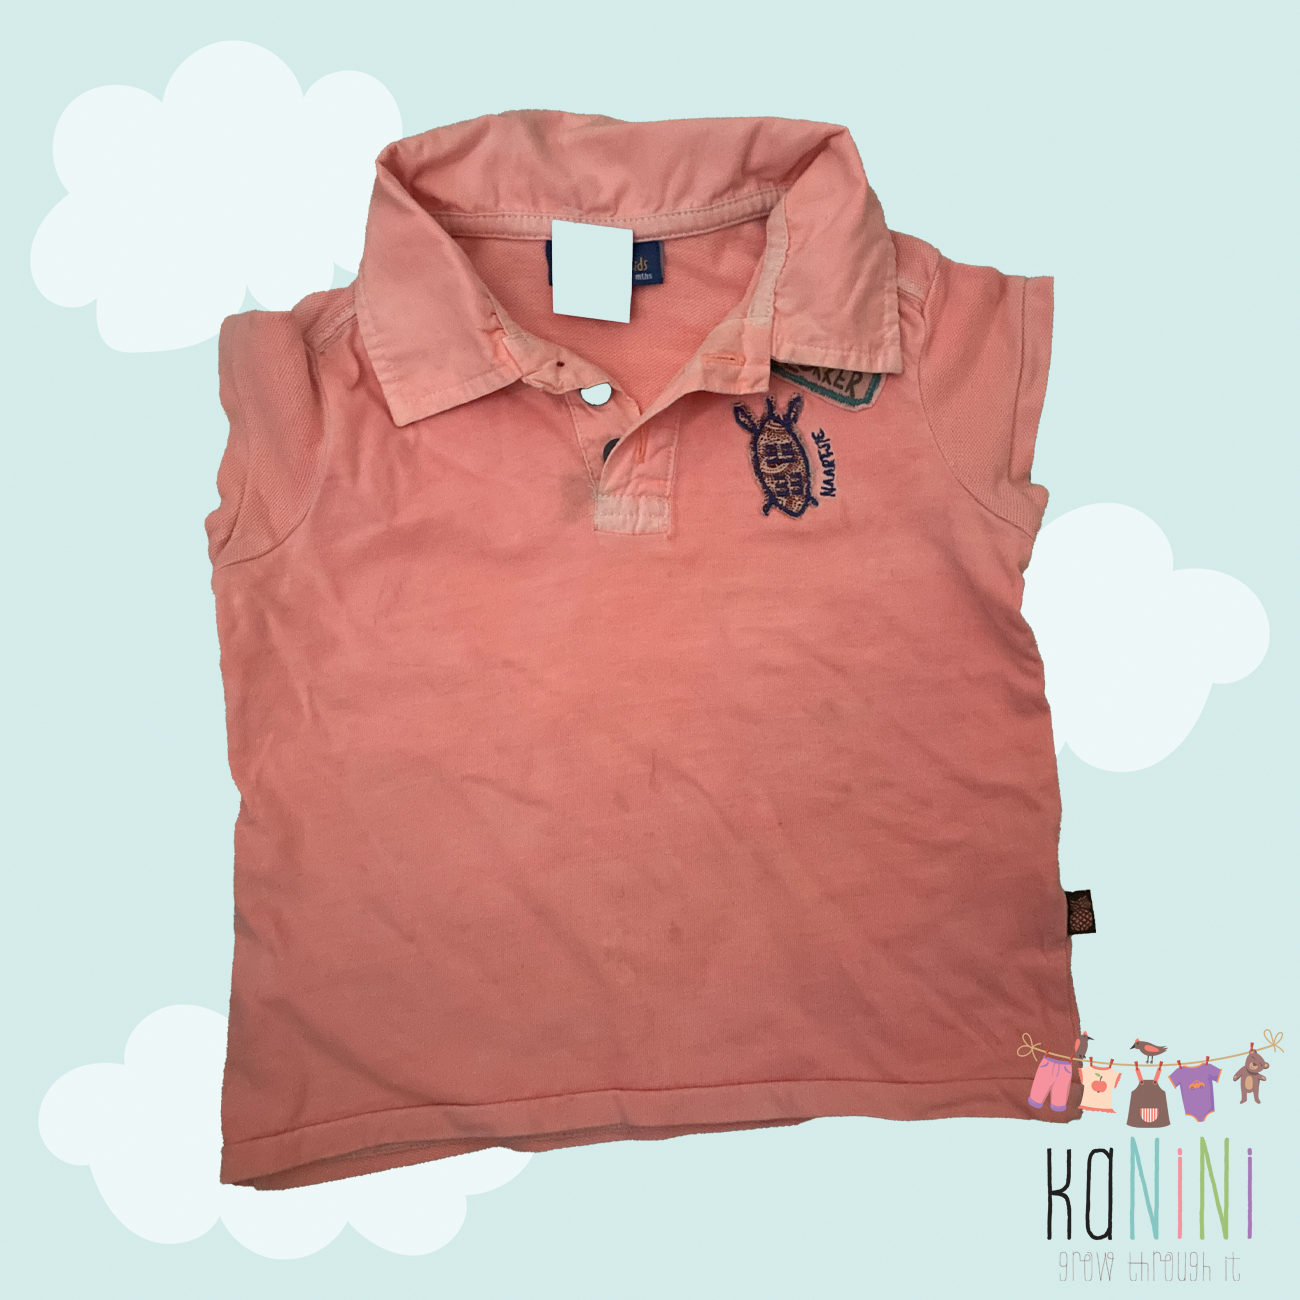 Featured image for “Naartjie 6 - 12 Months Boys Orange T-Shirt”